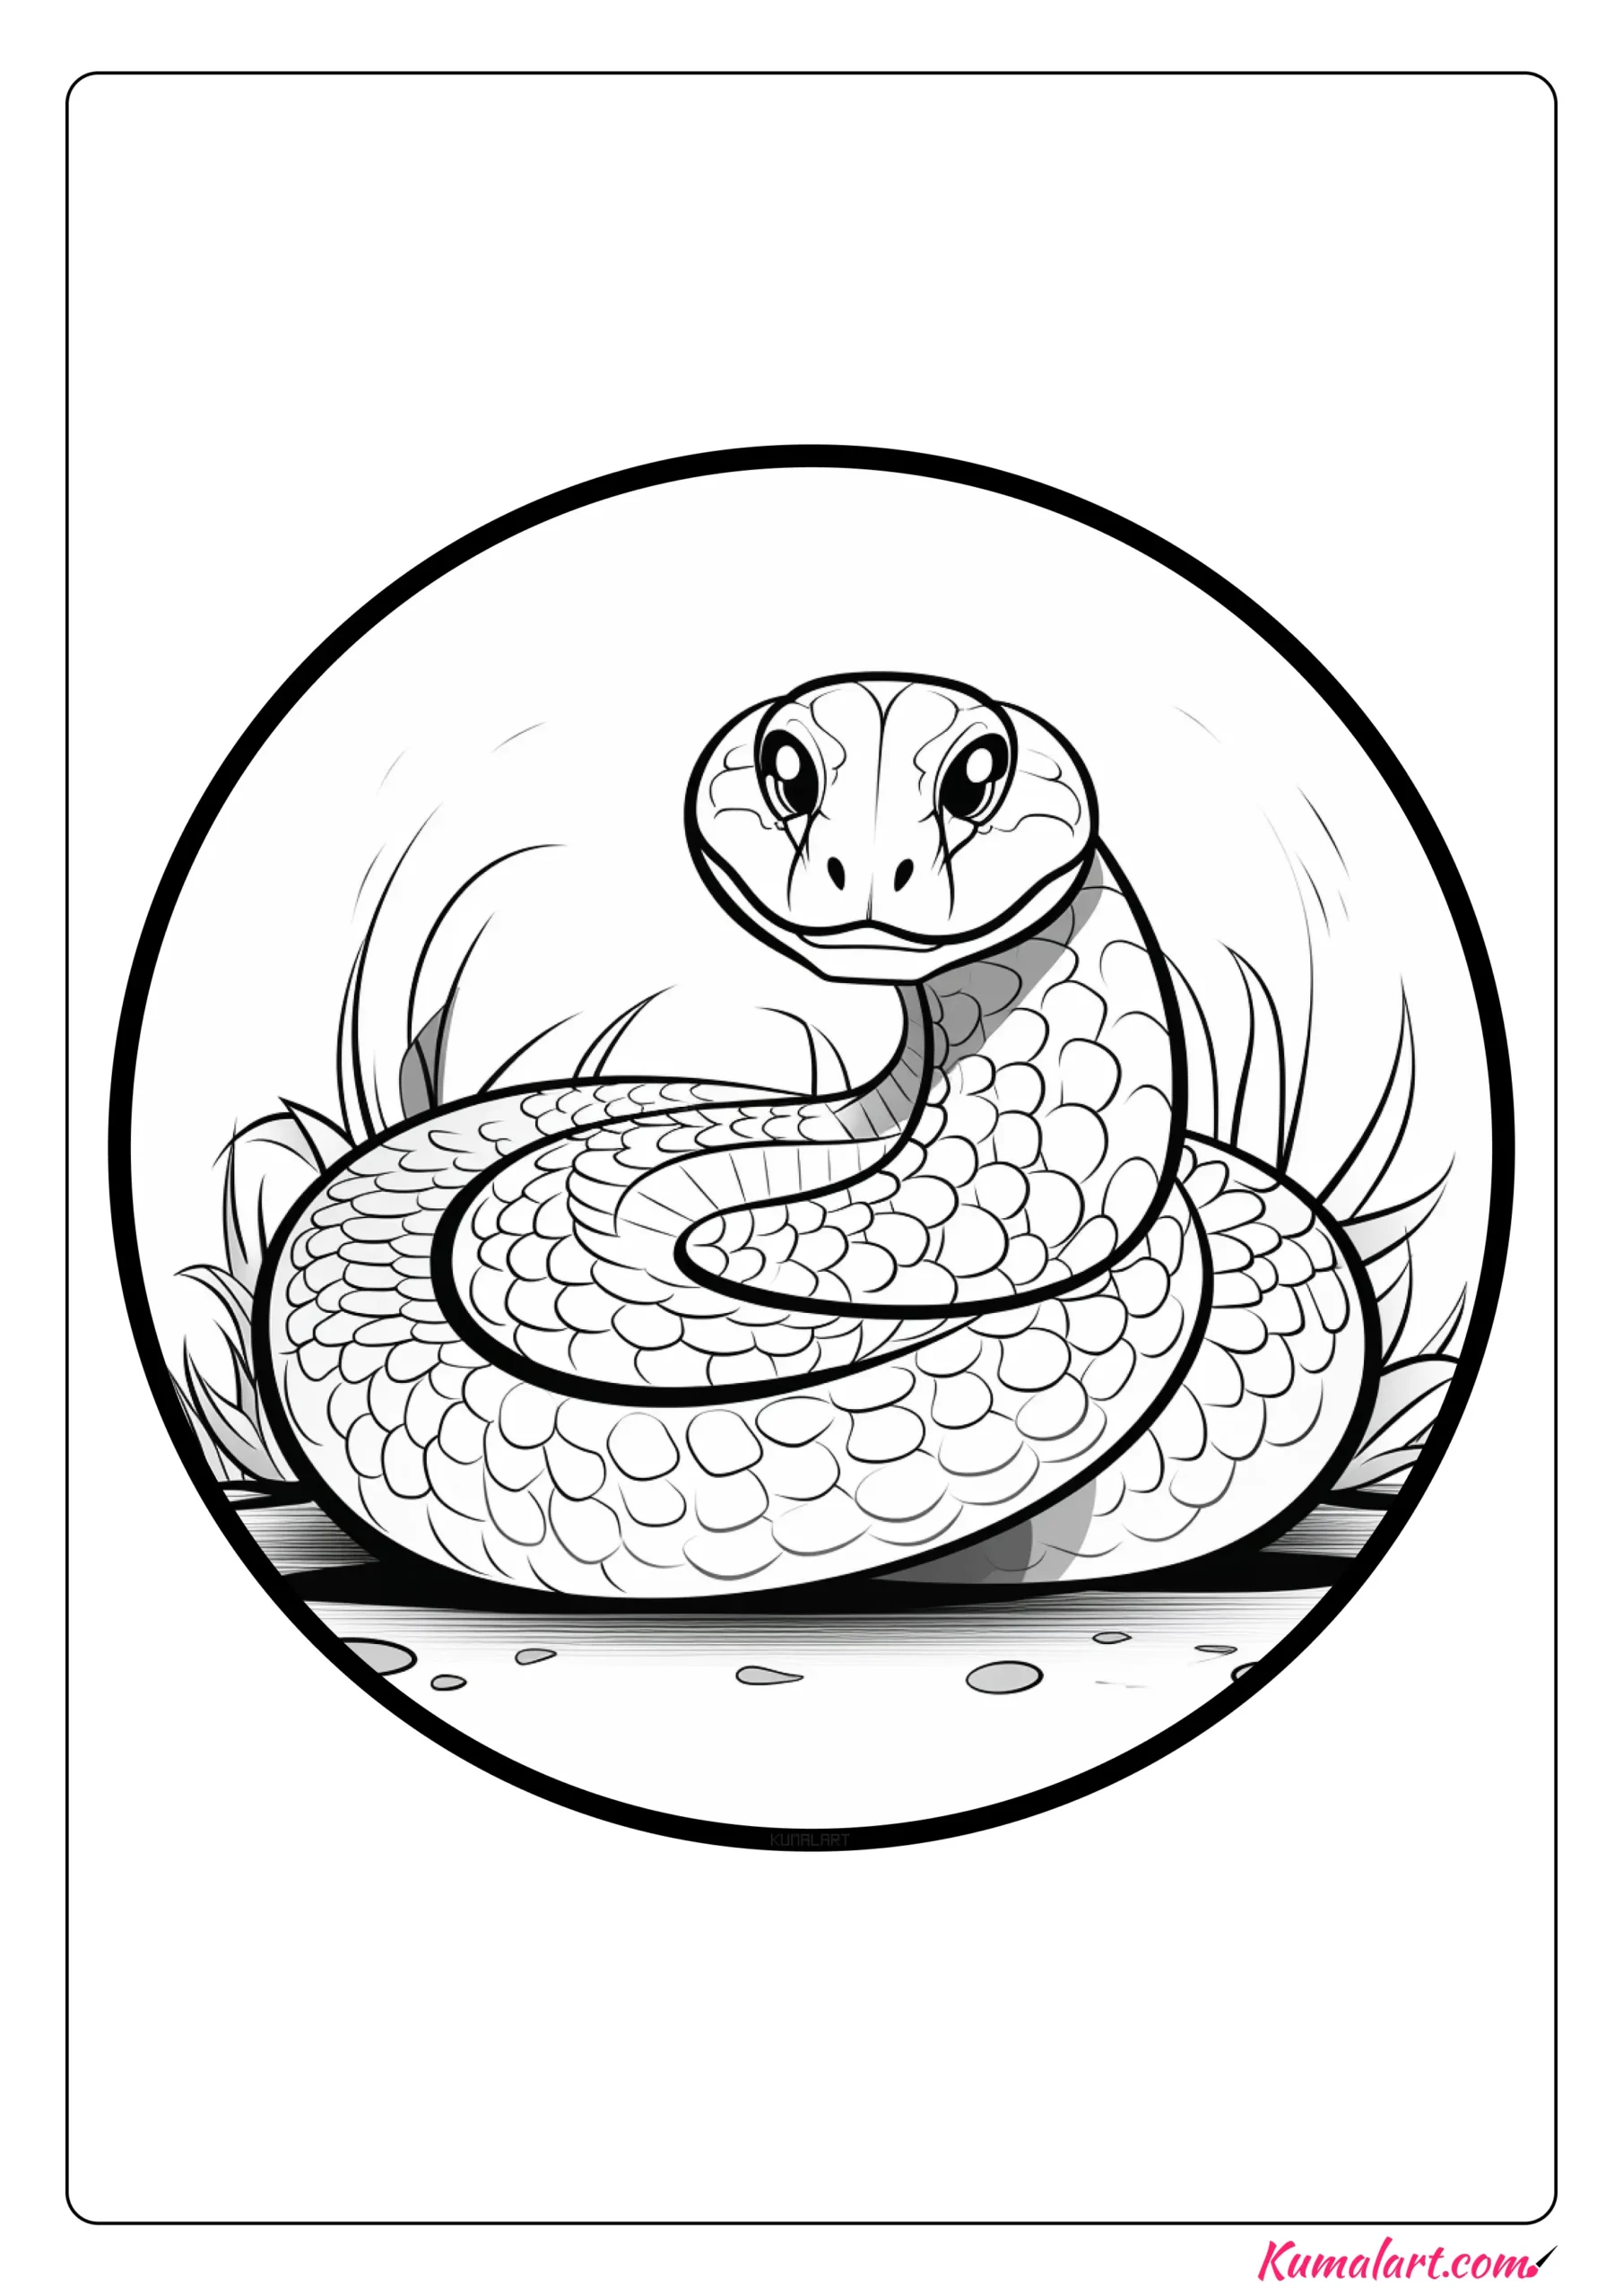 Crotalus Tigris Rattle Snake Coloring Page